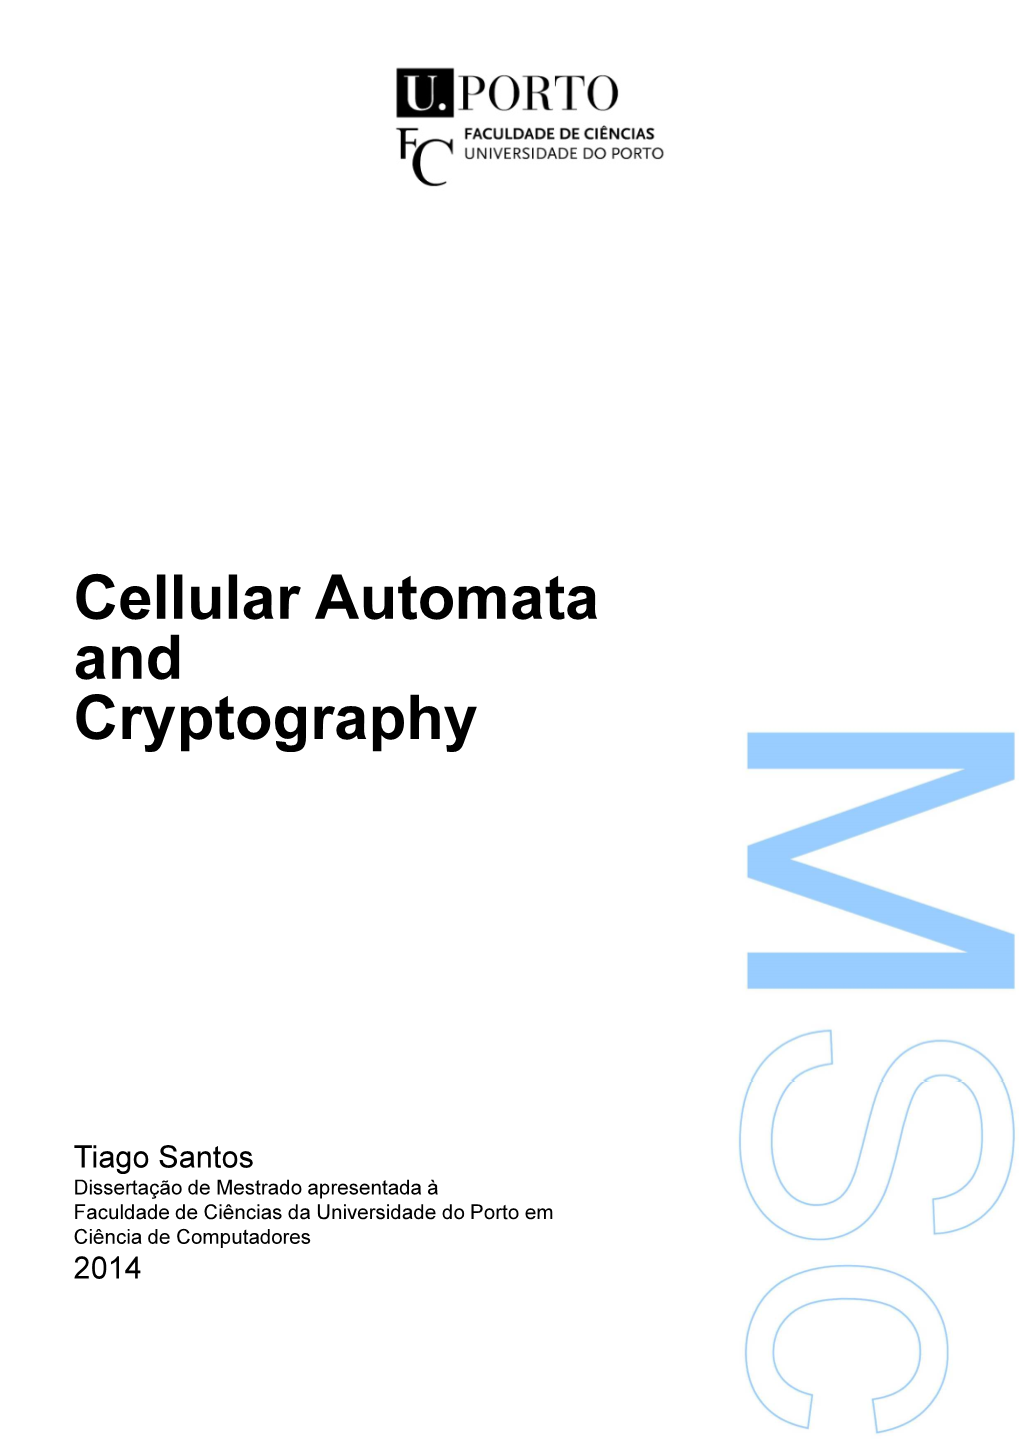 Cellular Automata and Cryptography